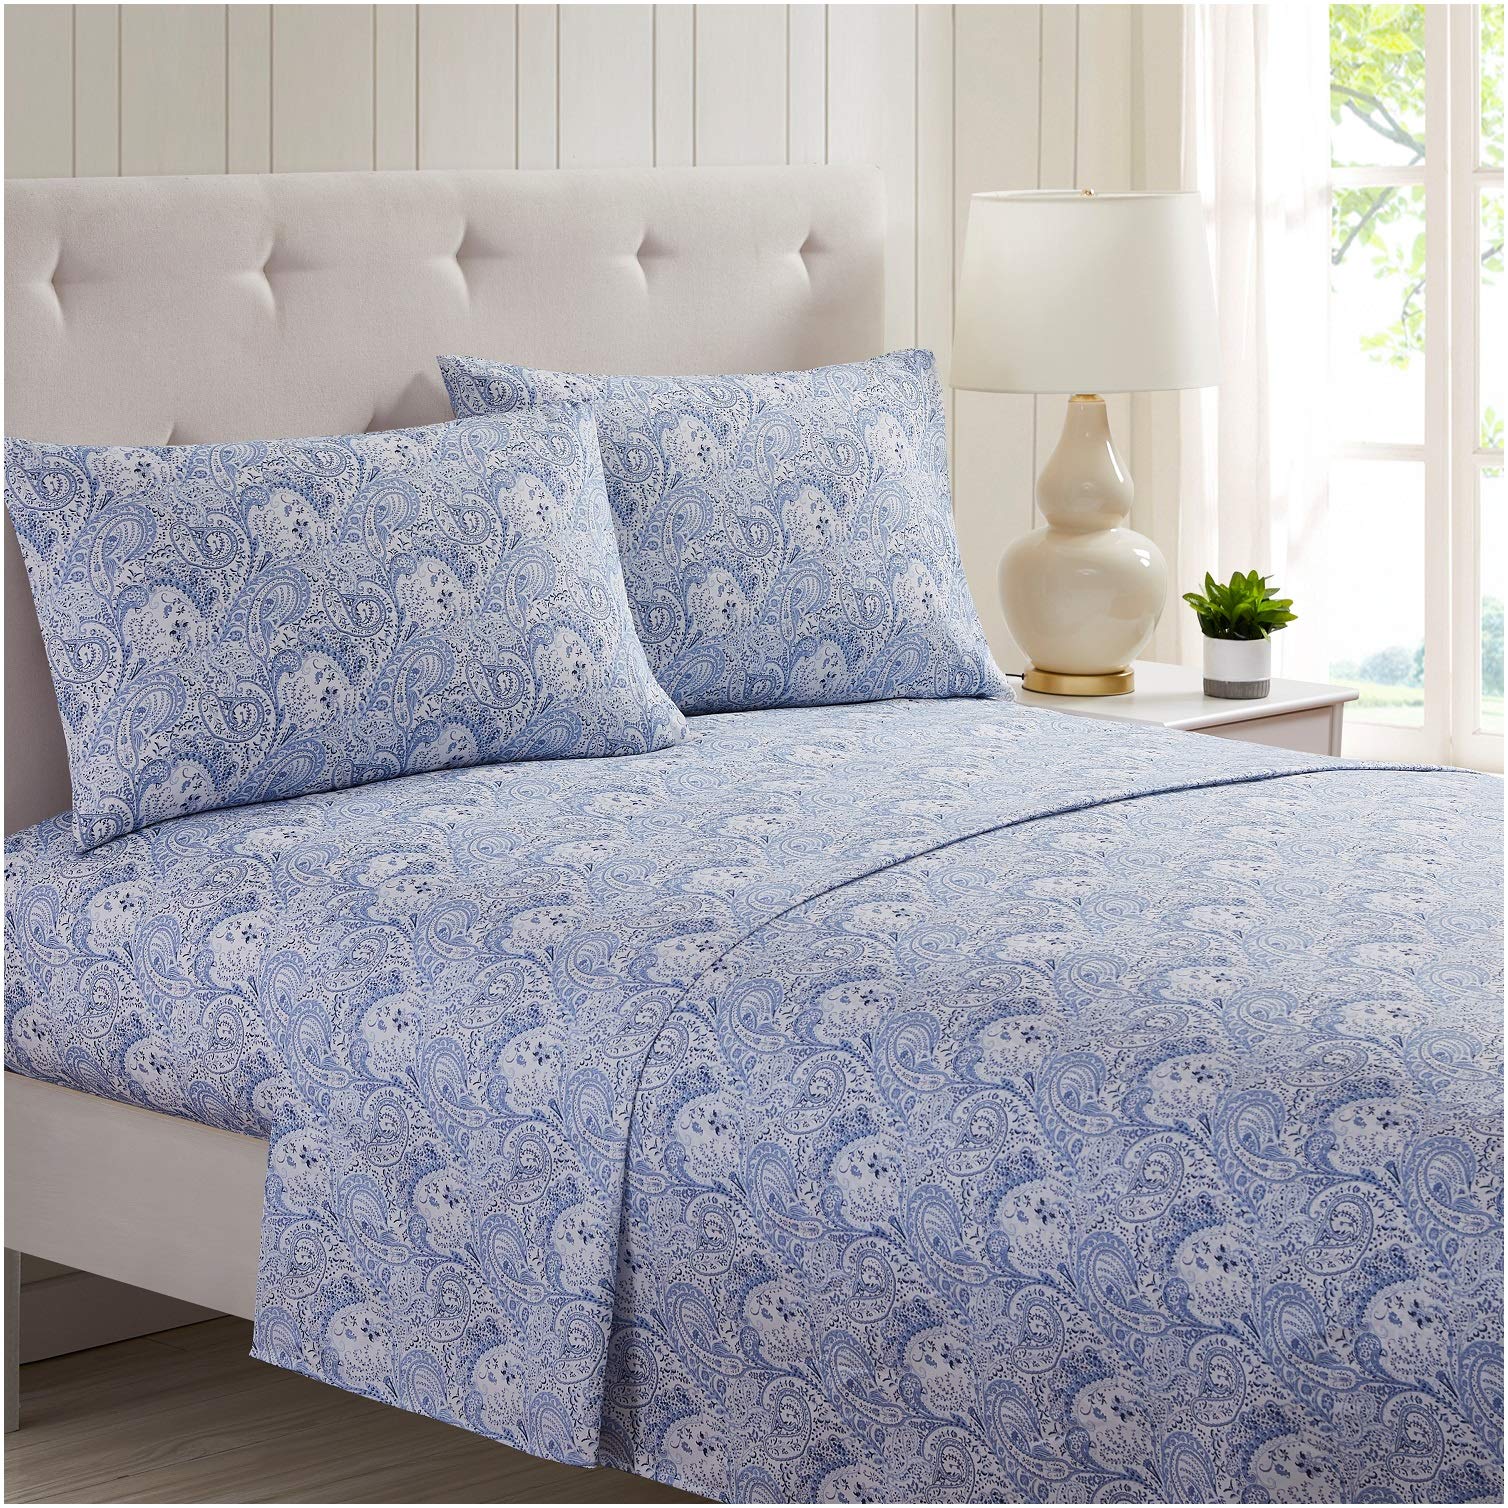 Book Cover Mellanni Queen Sheet Set - Hotel Luxury 1800 Bedding Sheets & Pillowcases - Extra Soft Cooling Bed Sheets - Deep Pocket up to 16 inch - Wrinkle, Fade, Stain Resistant - 4 Piece (Queen, Paisley Blue)